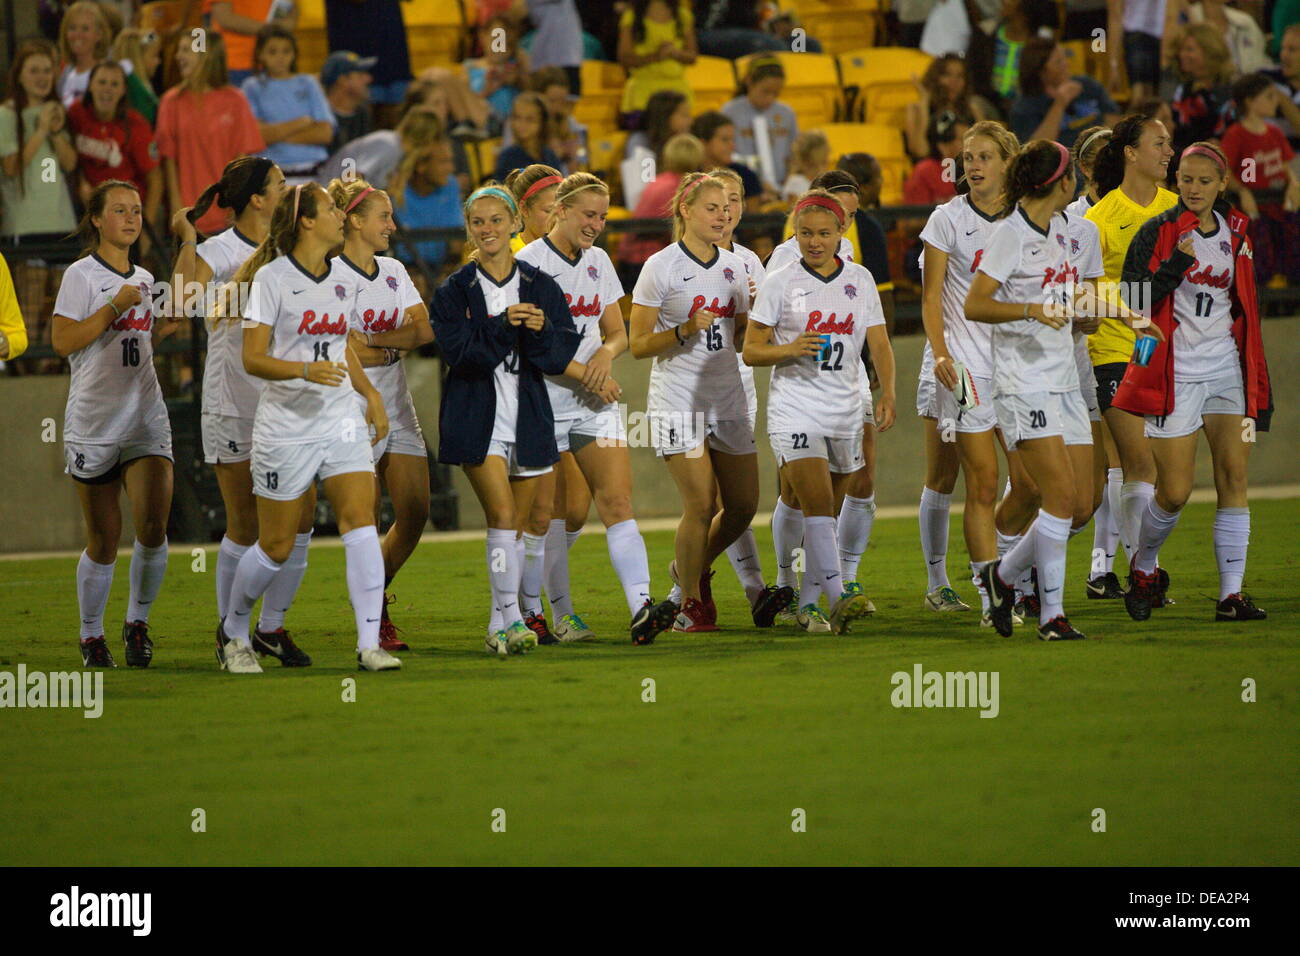 Kennesaw, Georgia.  USA.   September 13, 2013.   Ole Miss women's soccer team celebrates after Ole Miss' 2-1 win over Kennesaw State at Fifth Third Bank Stadium.  Women's NCAA Division I Soccer. © Wayne Hughes/Alamy Live News Stock Photo